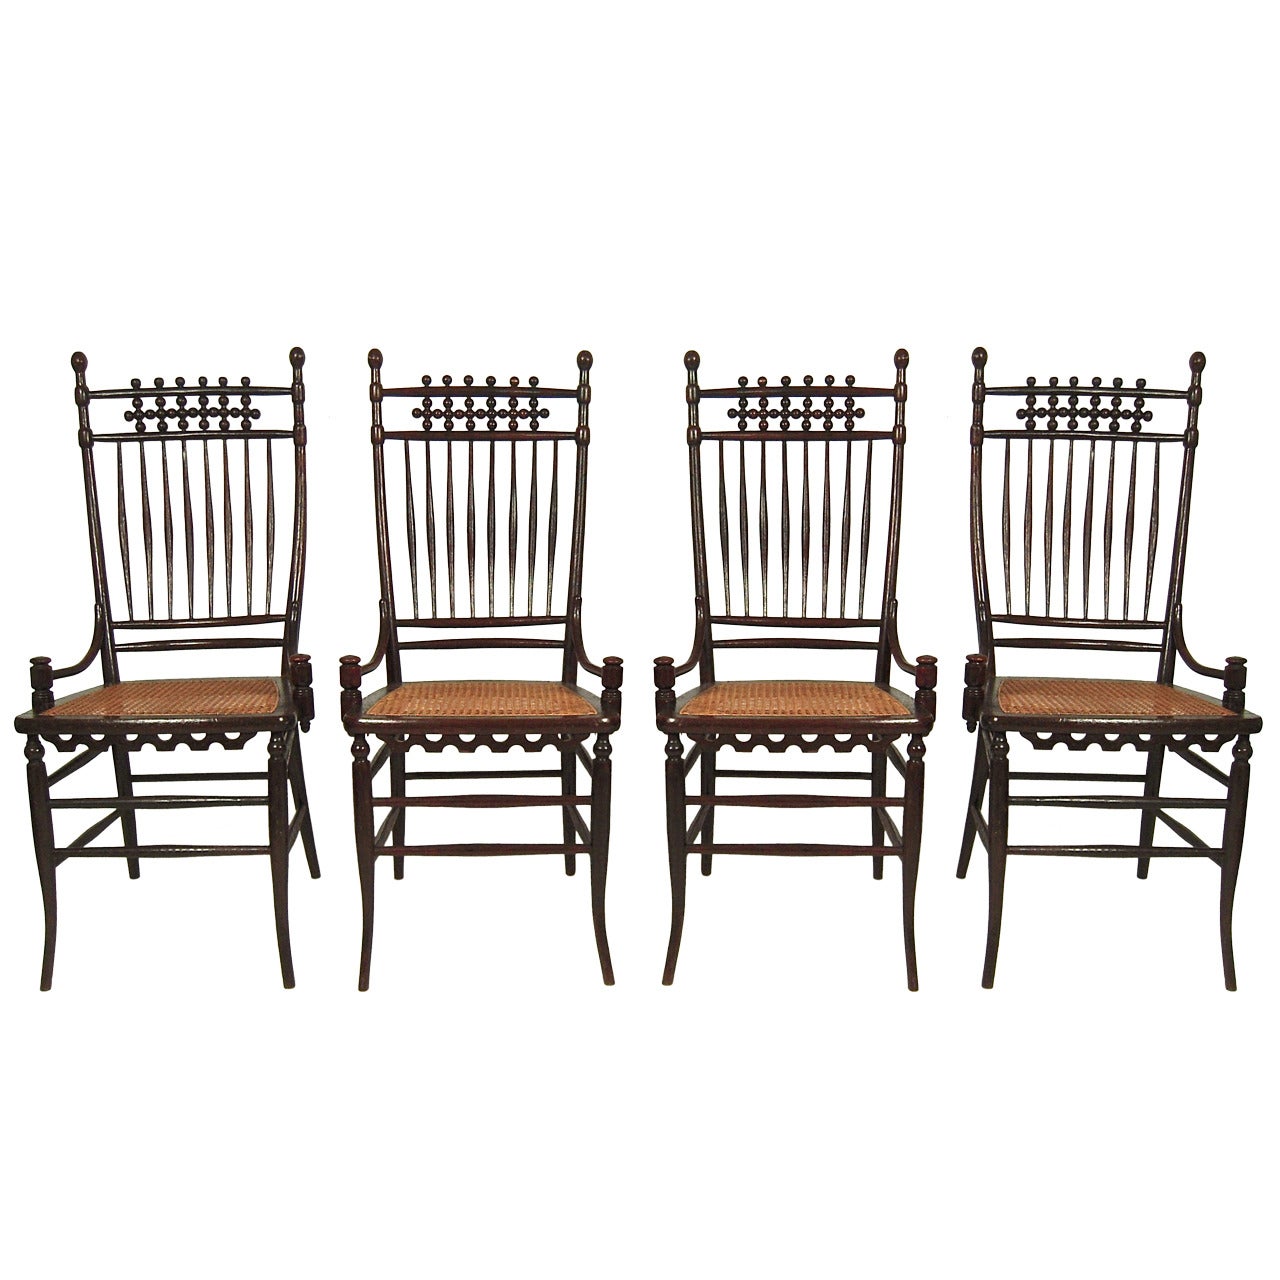 Set of Four Unusual, Graphic Aesthetic Movement Period Chairs